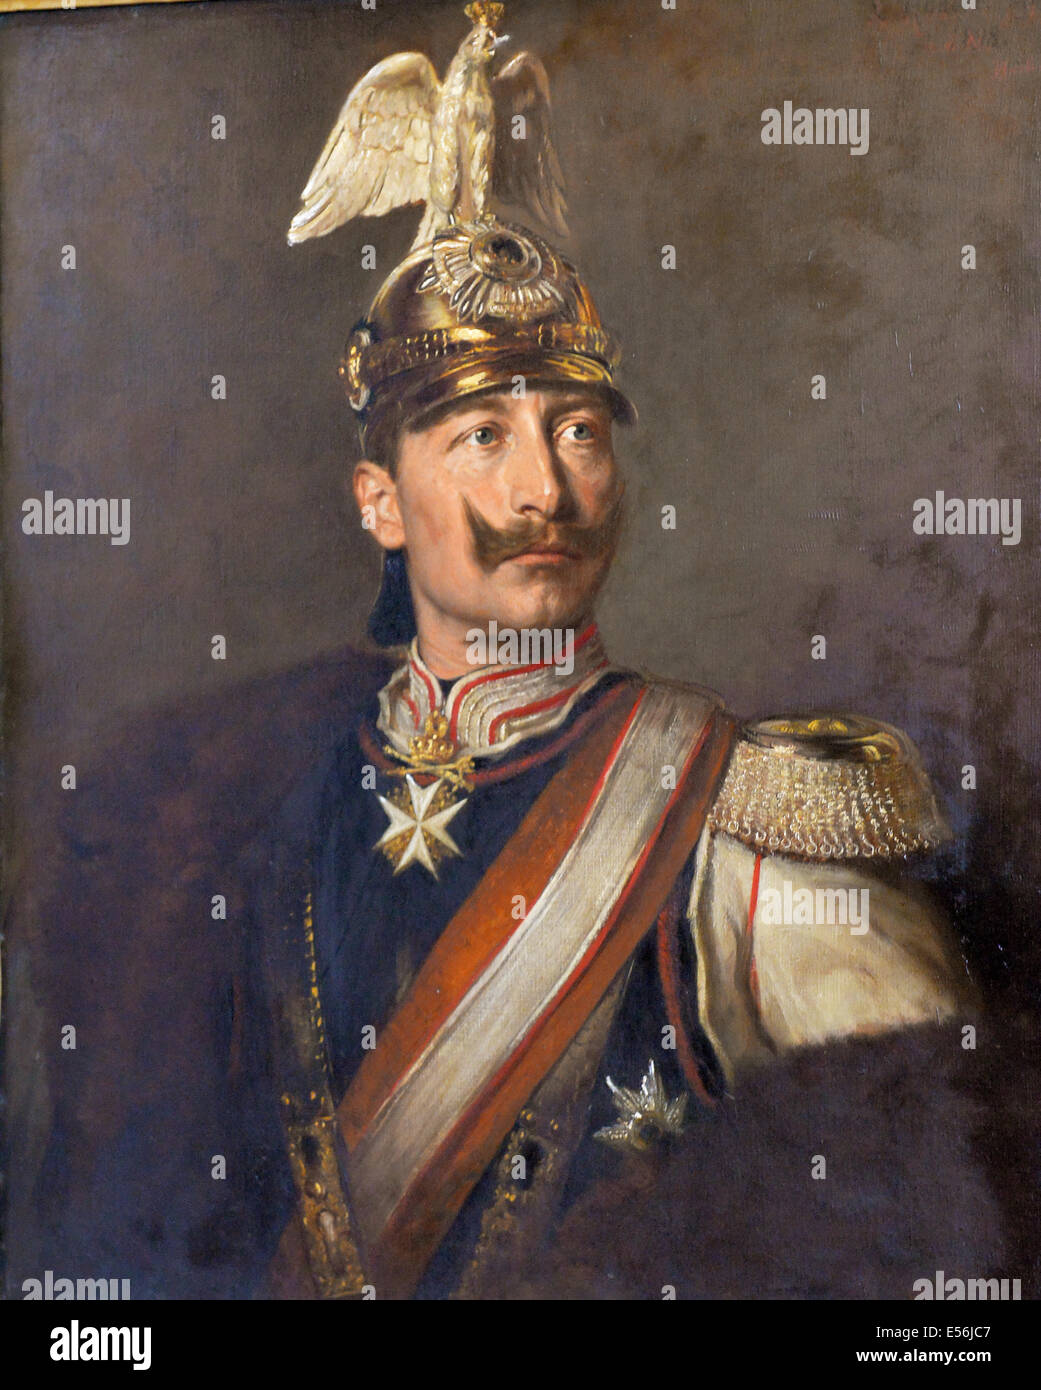 A portrait of Kaiser Wilhelm II in the uniform of the Guarde du Corps of Ludwig Noster is on display at the New Palace in Potsdam, Germany, 22 July 2014. The Prussian Palaces and Gardens Foundation Berlin-Brandenburg commemorates commemorates the start of WWI with the exhibition 'Milestones of History' at the site wherre the declaration of war was actually signed. Photo: BERND SETTNIK/dpa Stock Photo